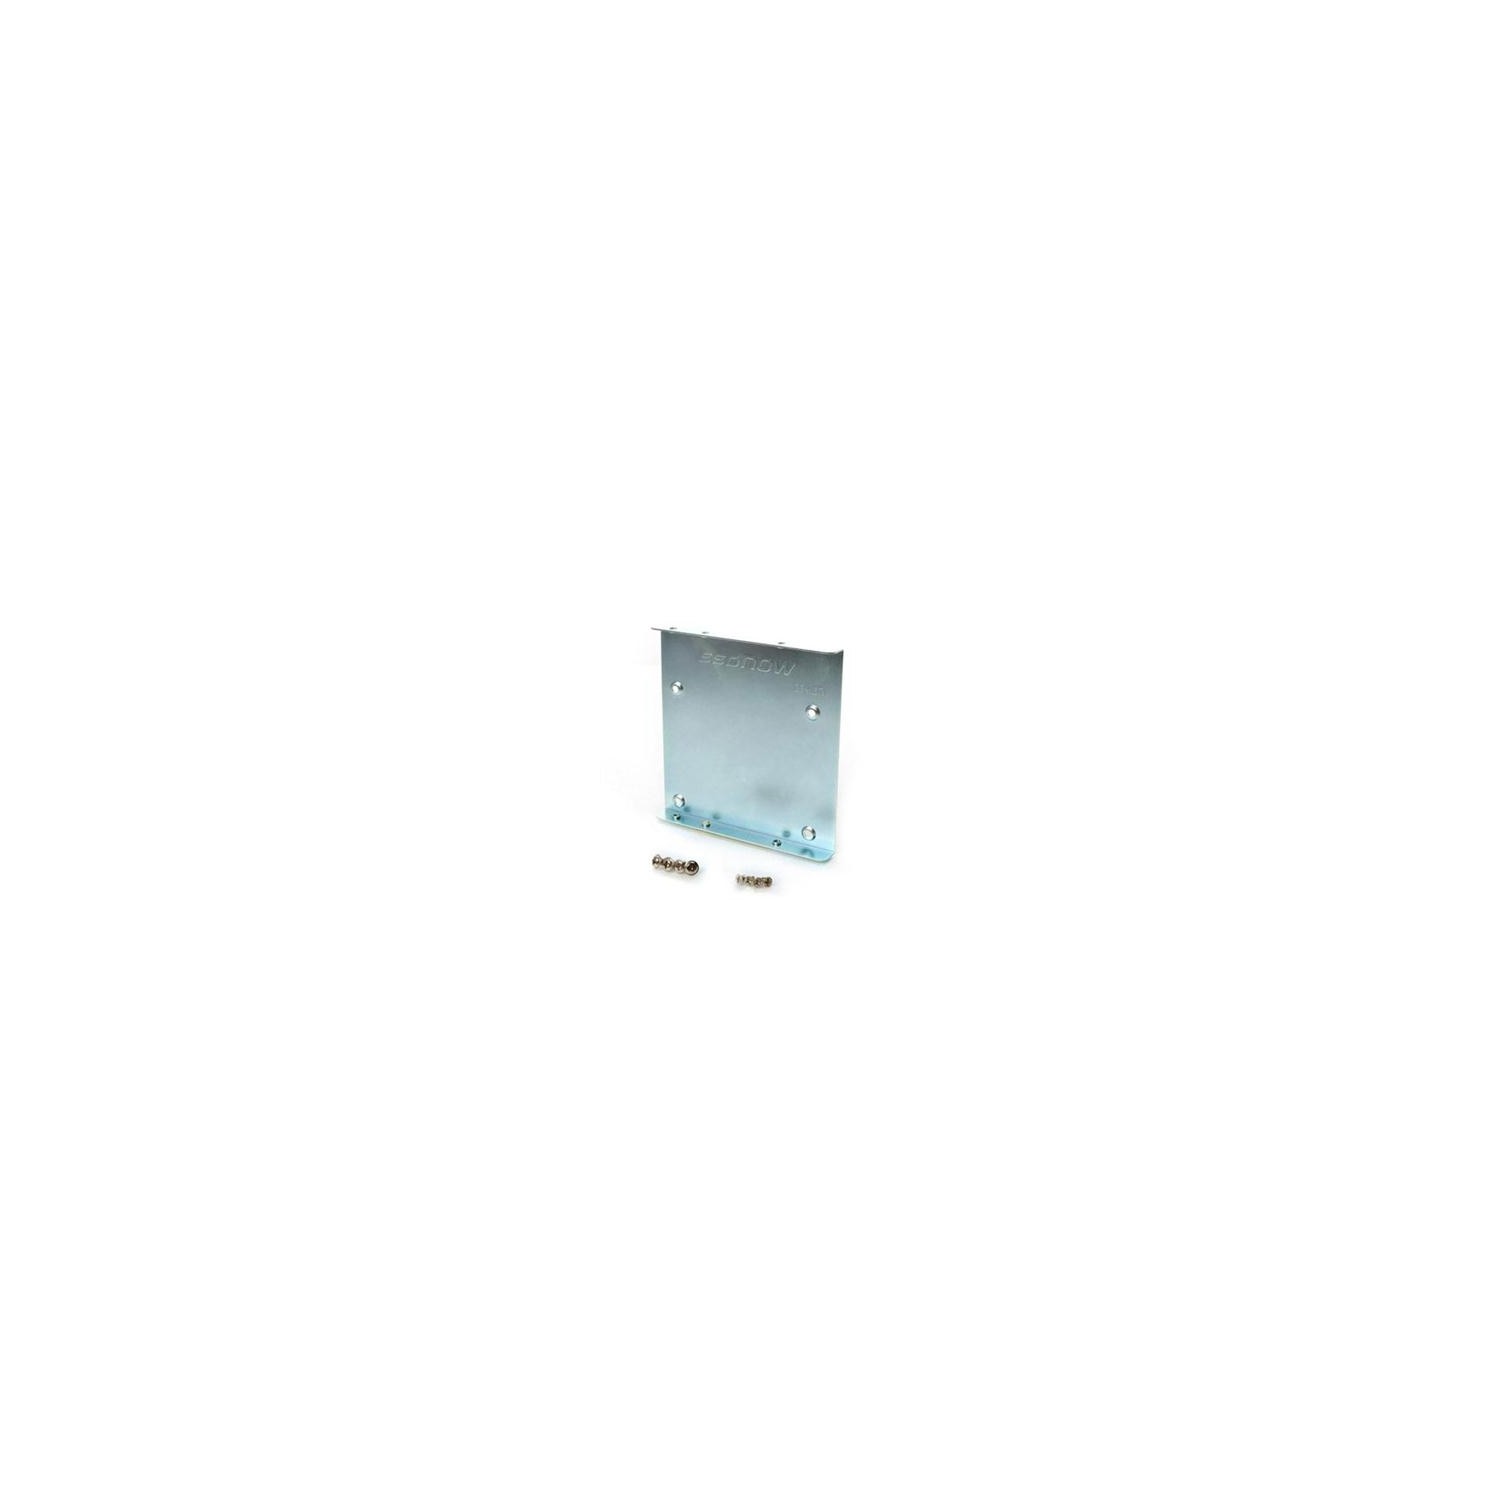 KINGSTON ACCESSORY SNA-BR2 35 2.5INCH TO 3.5INCH BRACKET WITH SCREW FOR SSD RETAIL SNA-BR2/35